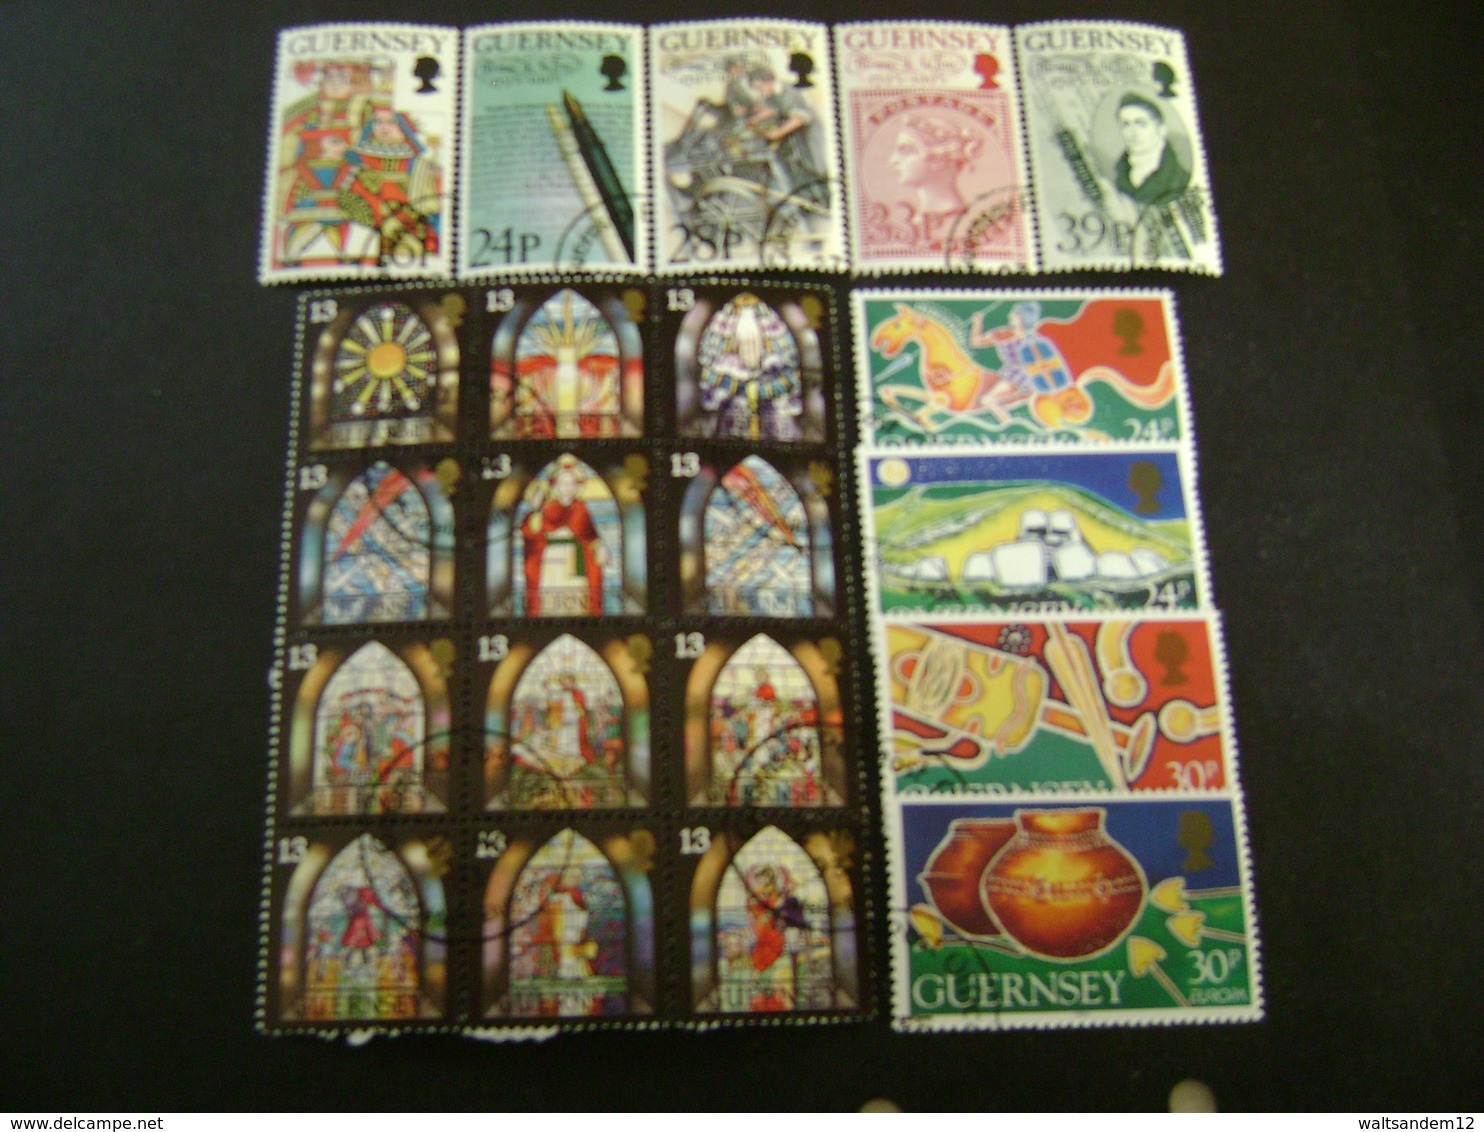 Guernsey 1993-1994 Commemorative/special Issues (SG 606-615, 617-643, 645-649, 651-662) 3 Images - Used [Sale Price] - Guernsey